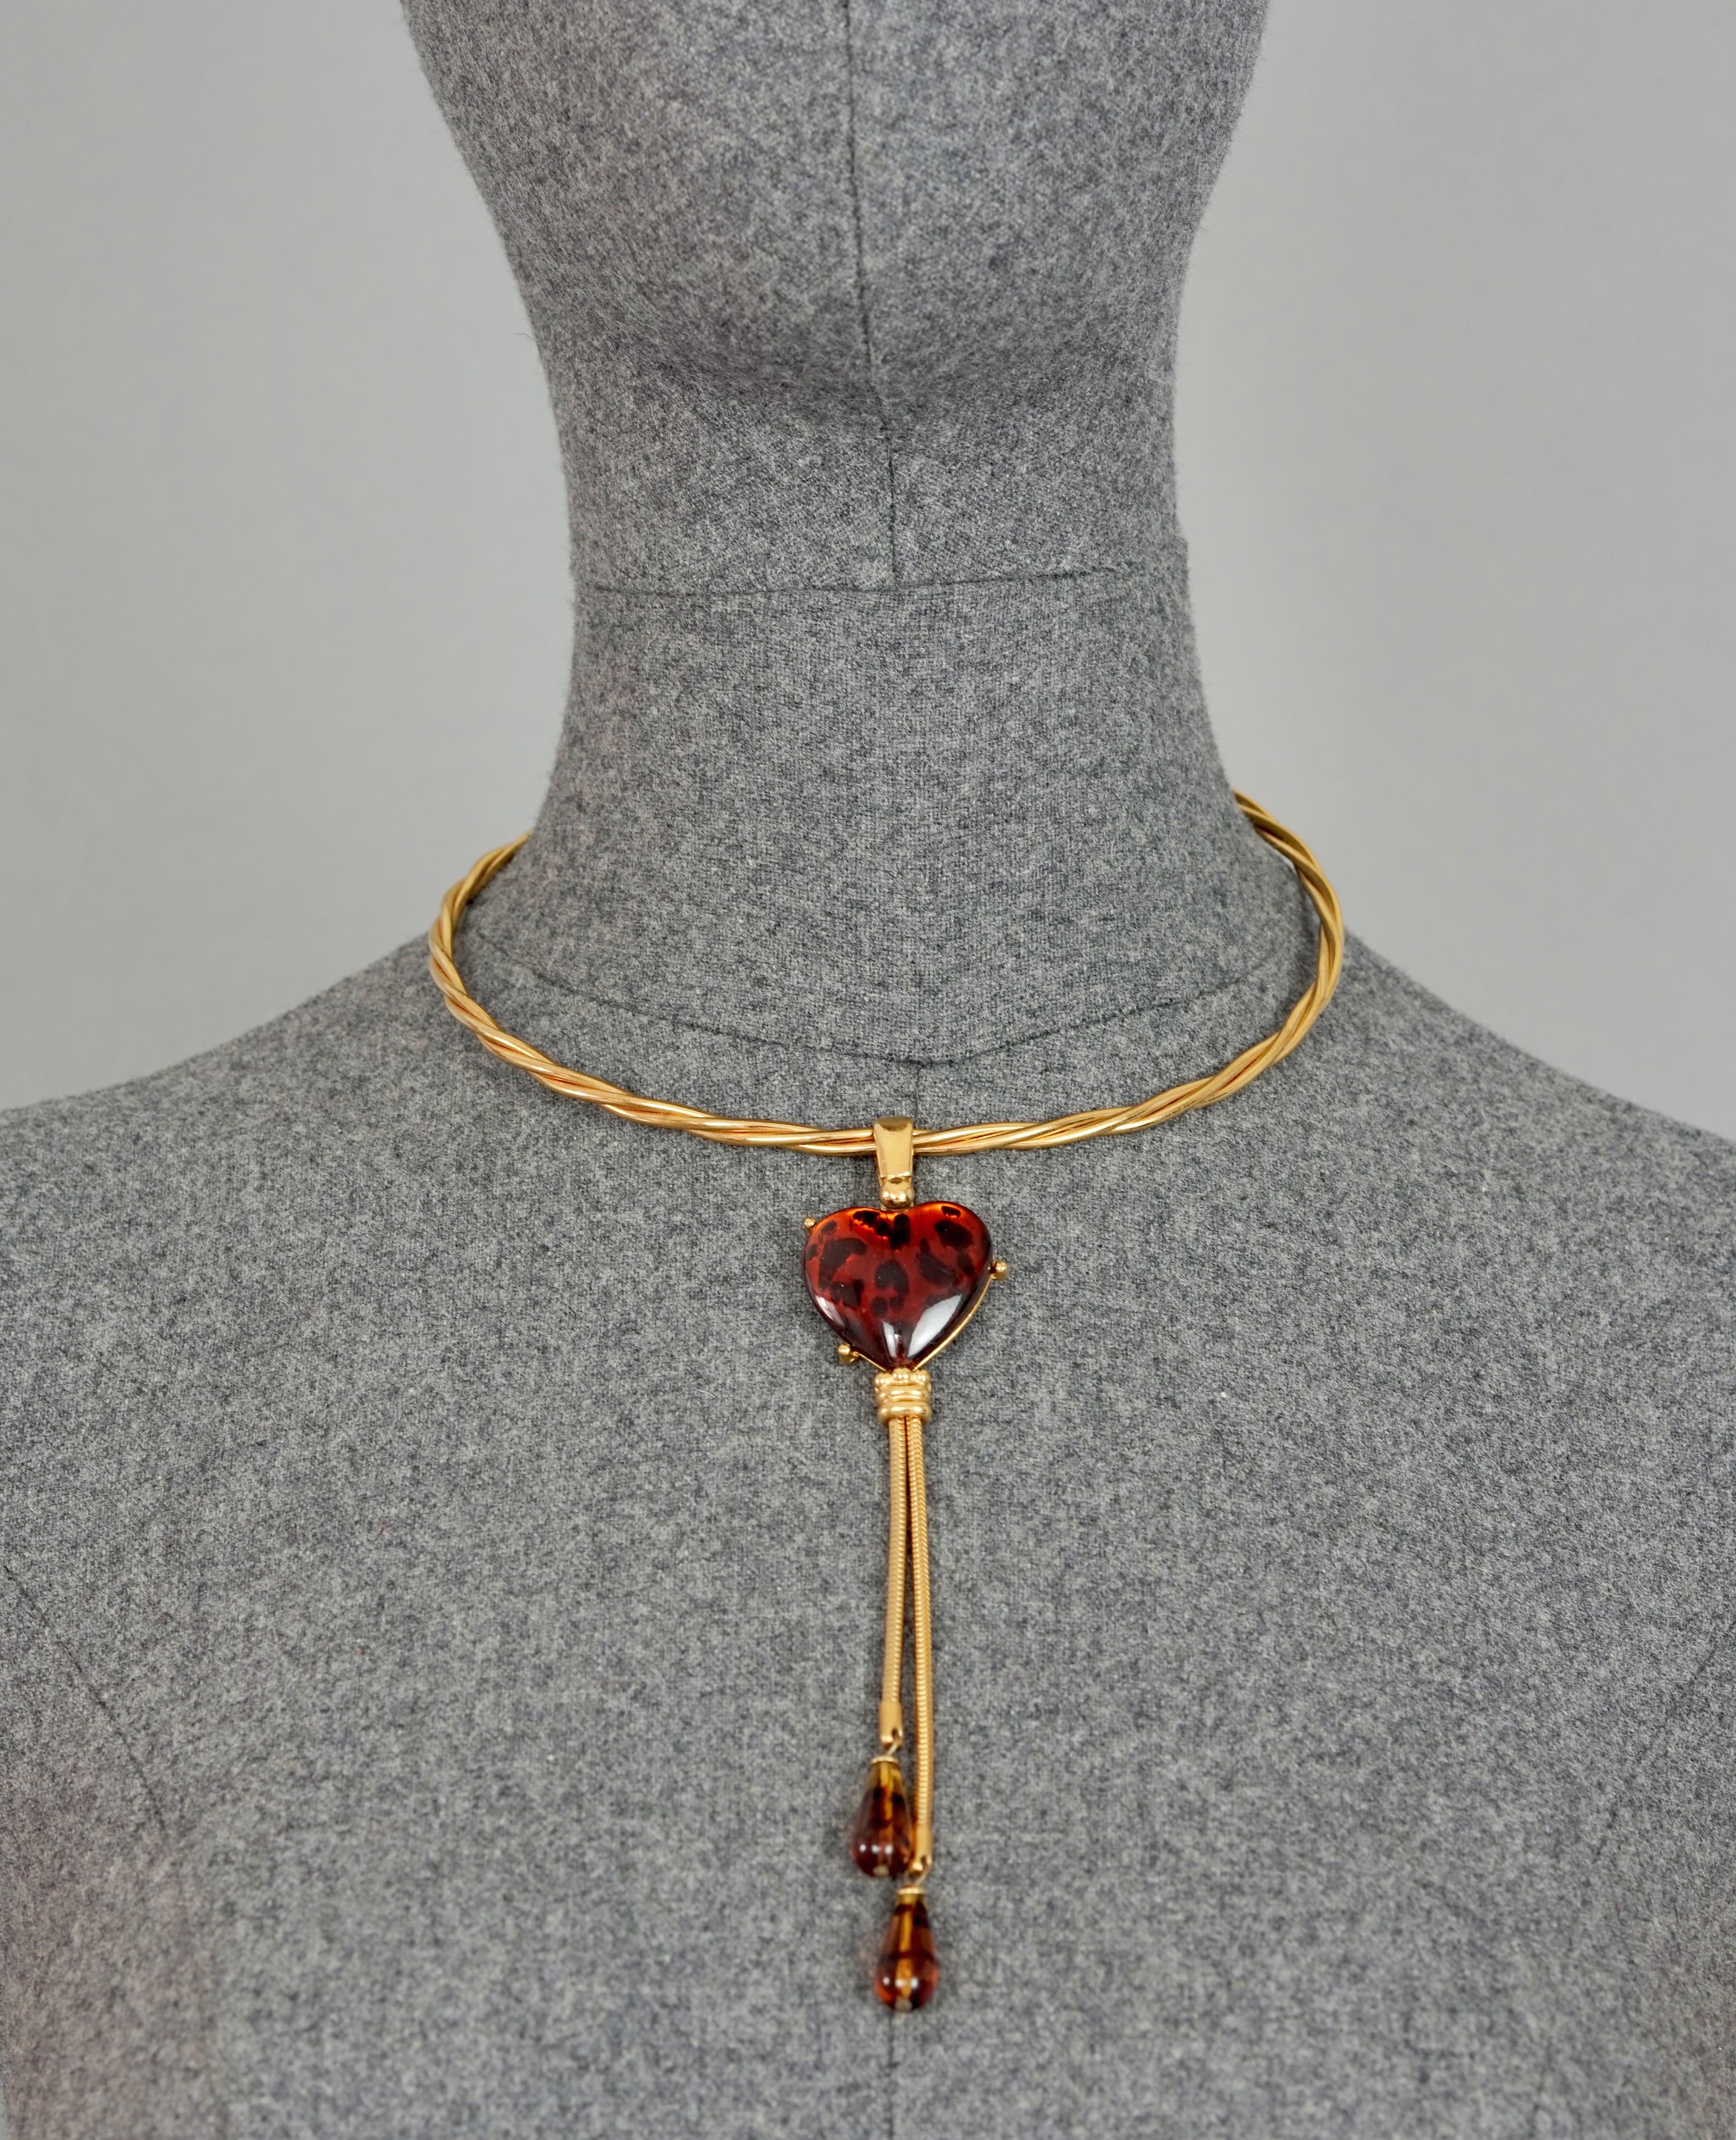 Vintage YVES SAINT LAURENT Heart Leopard Lariat Necklace

Measurements:
Pendant Height: 5.70 inches (14.5 cm)
Choker Circumference: 15.74 inches (40 cm) includes opening

Features:
- 100% Authentic YVES SAINT LAURENT.
- 3 Twisted wire rigid